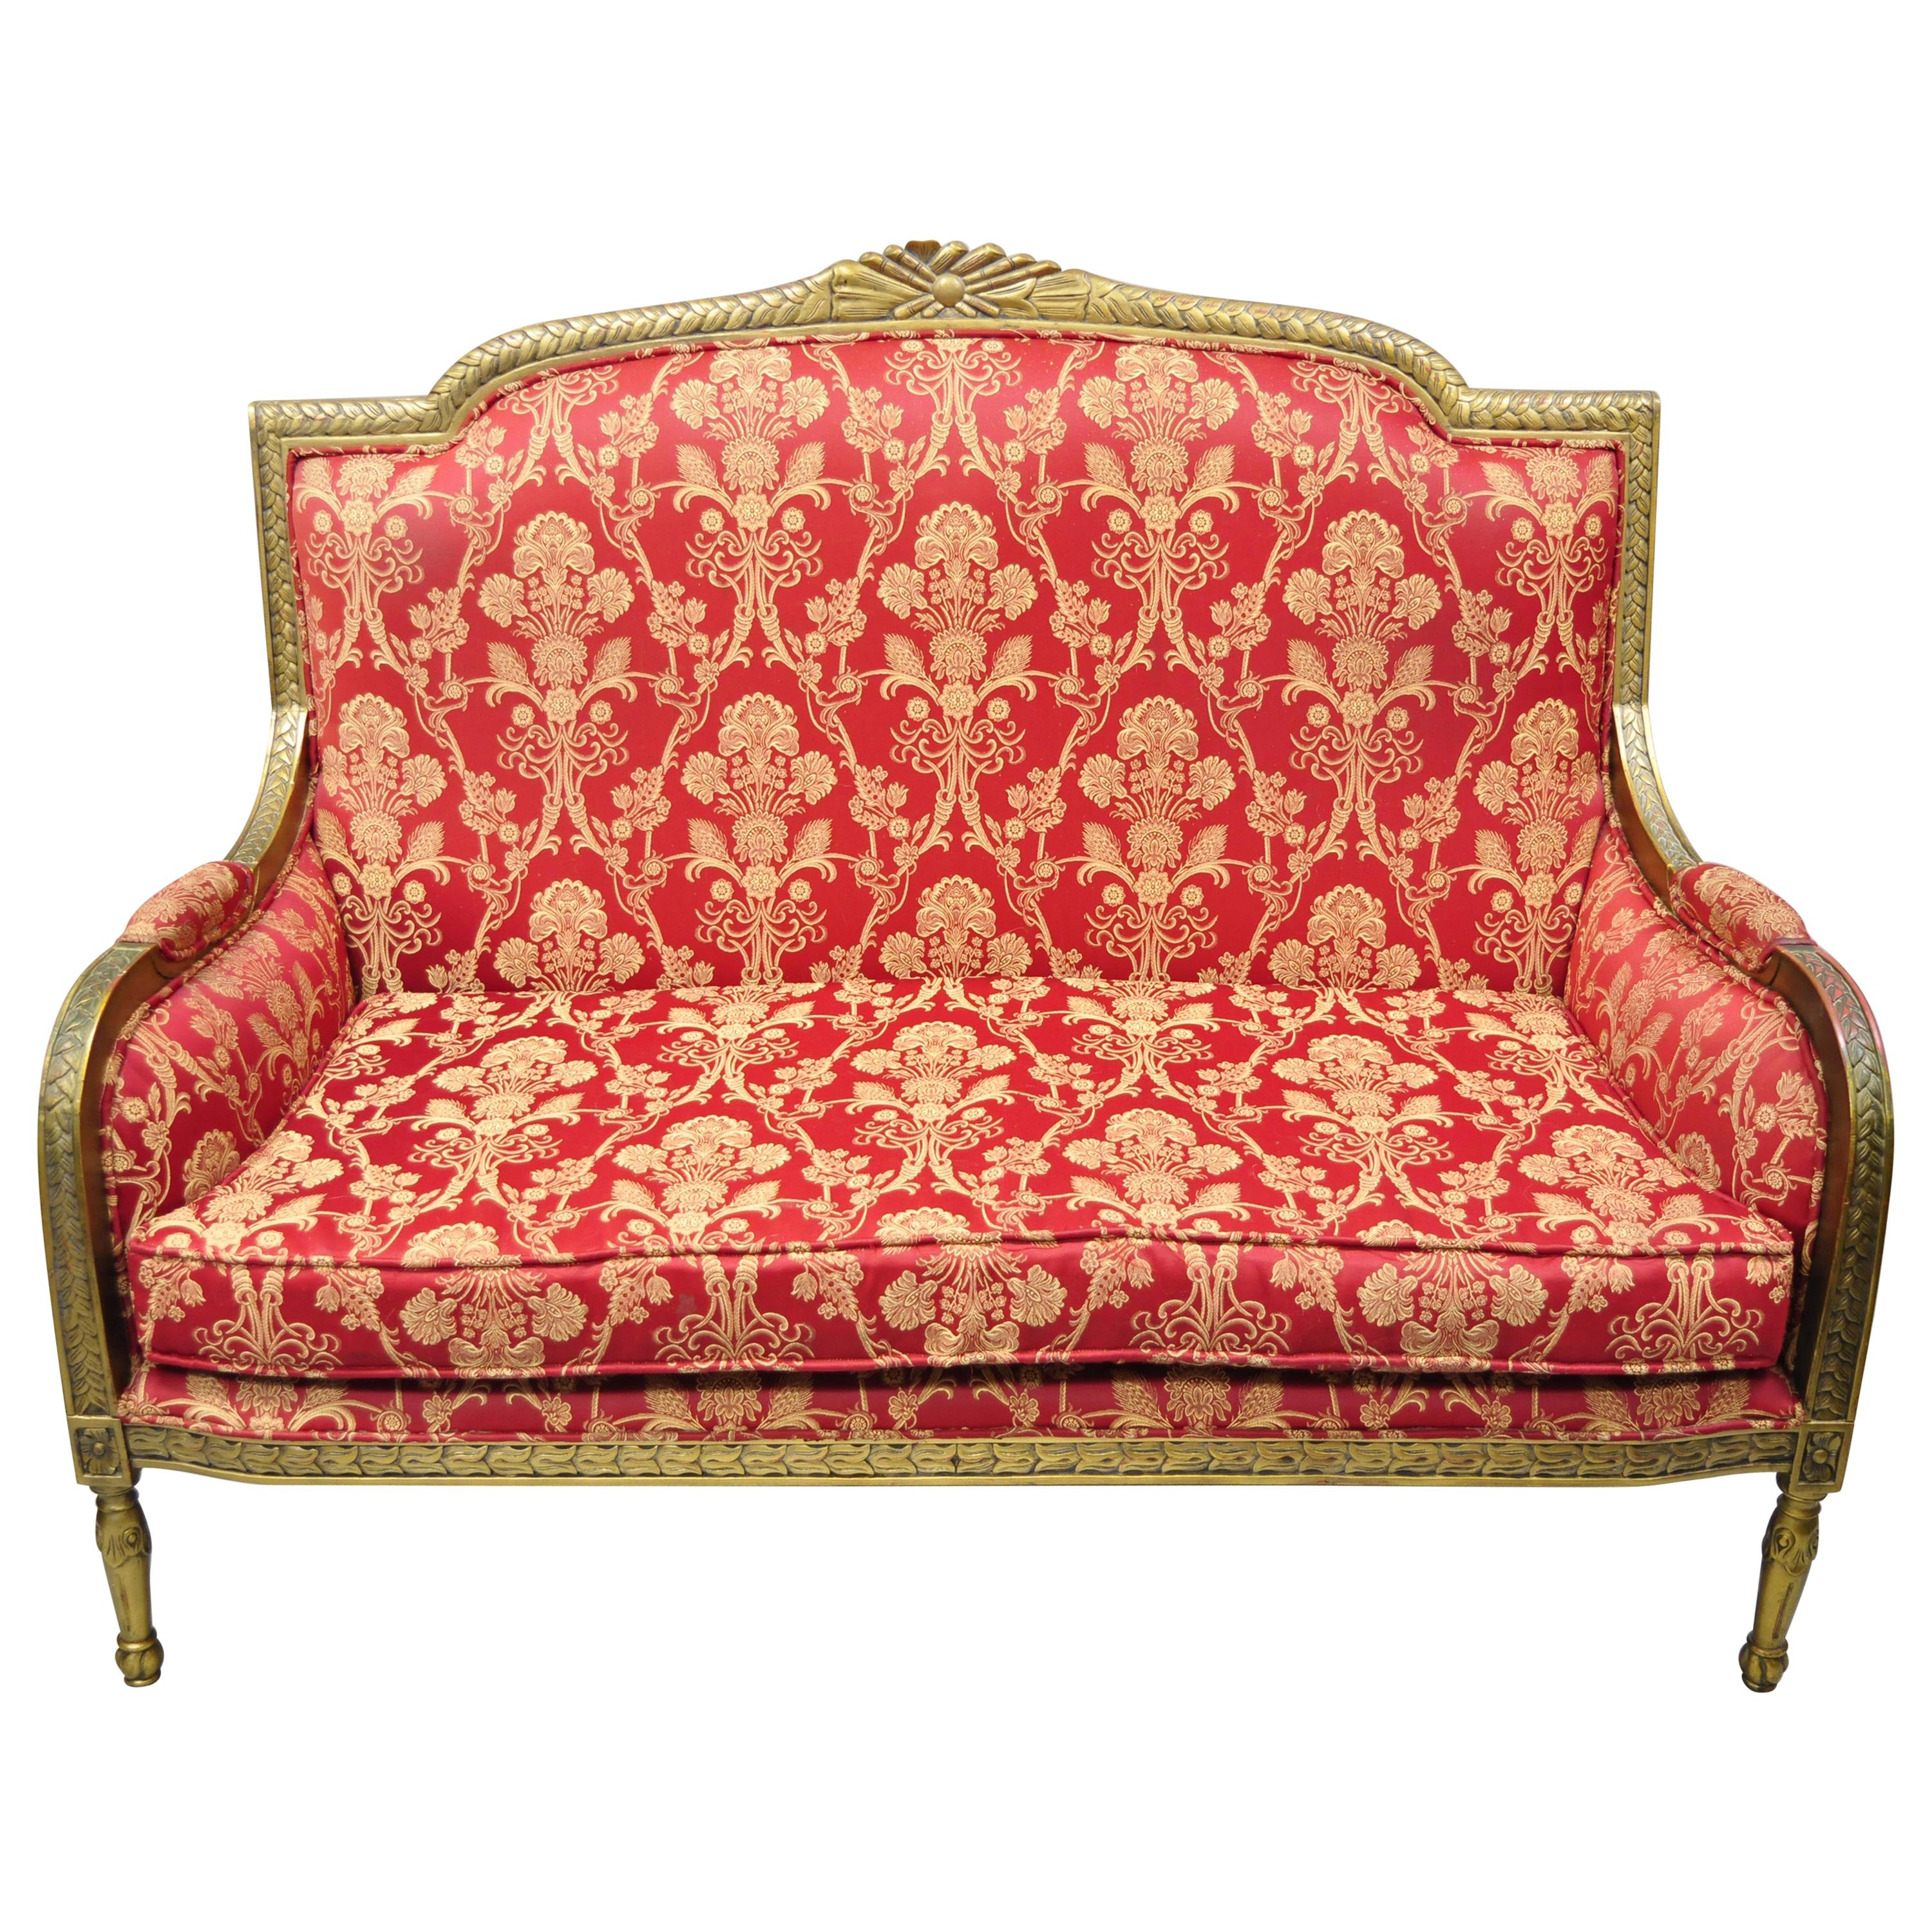 French Louis XVI Style Gold Red Upholstered Settee Sofa Loveseat Decorator Chair For Sale